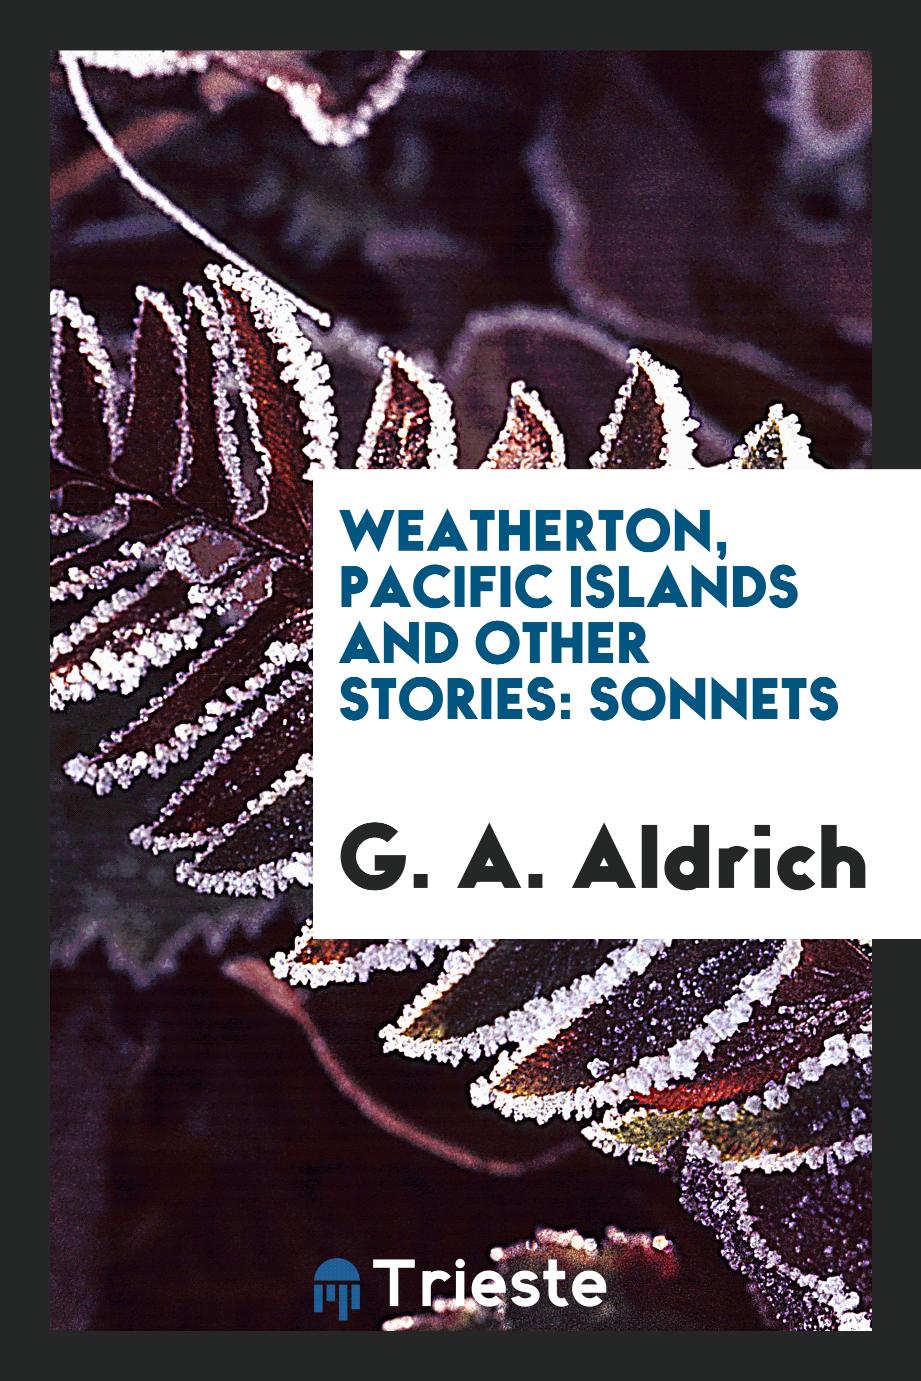 Weatherton, Pacific Islands and Other Stories: Sonnets